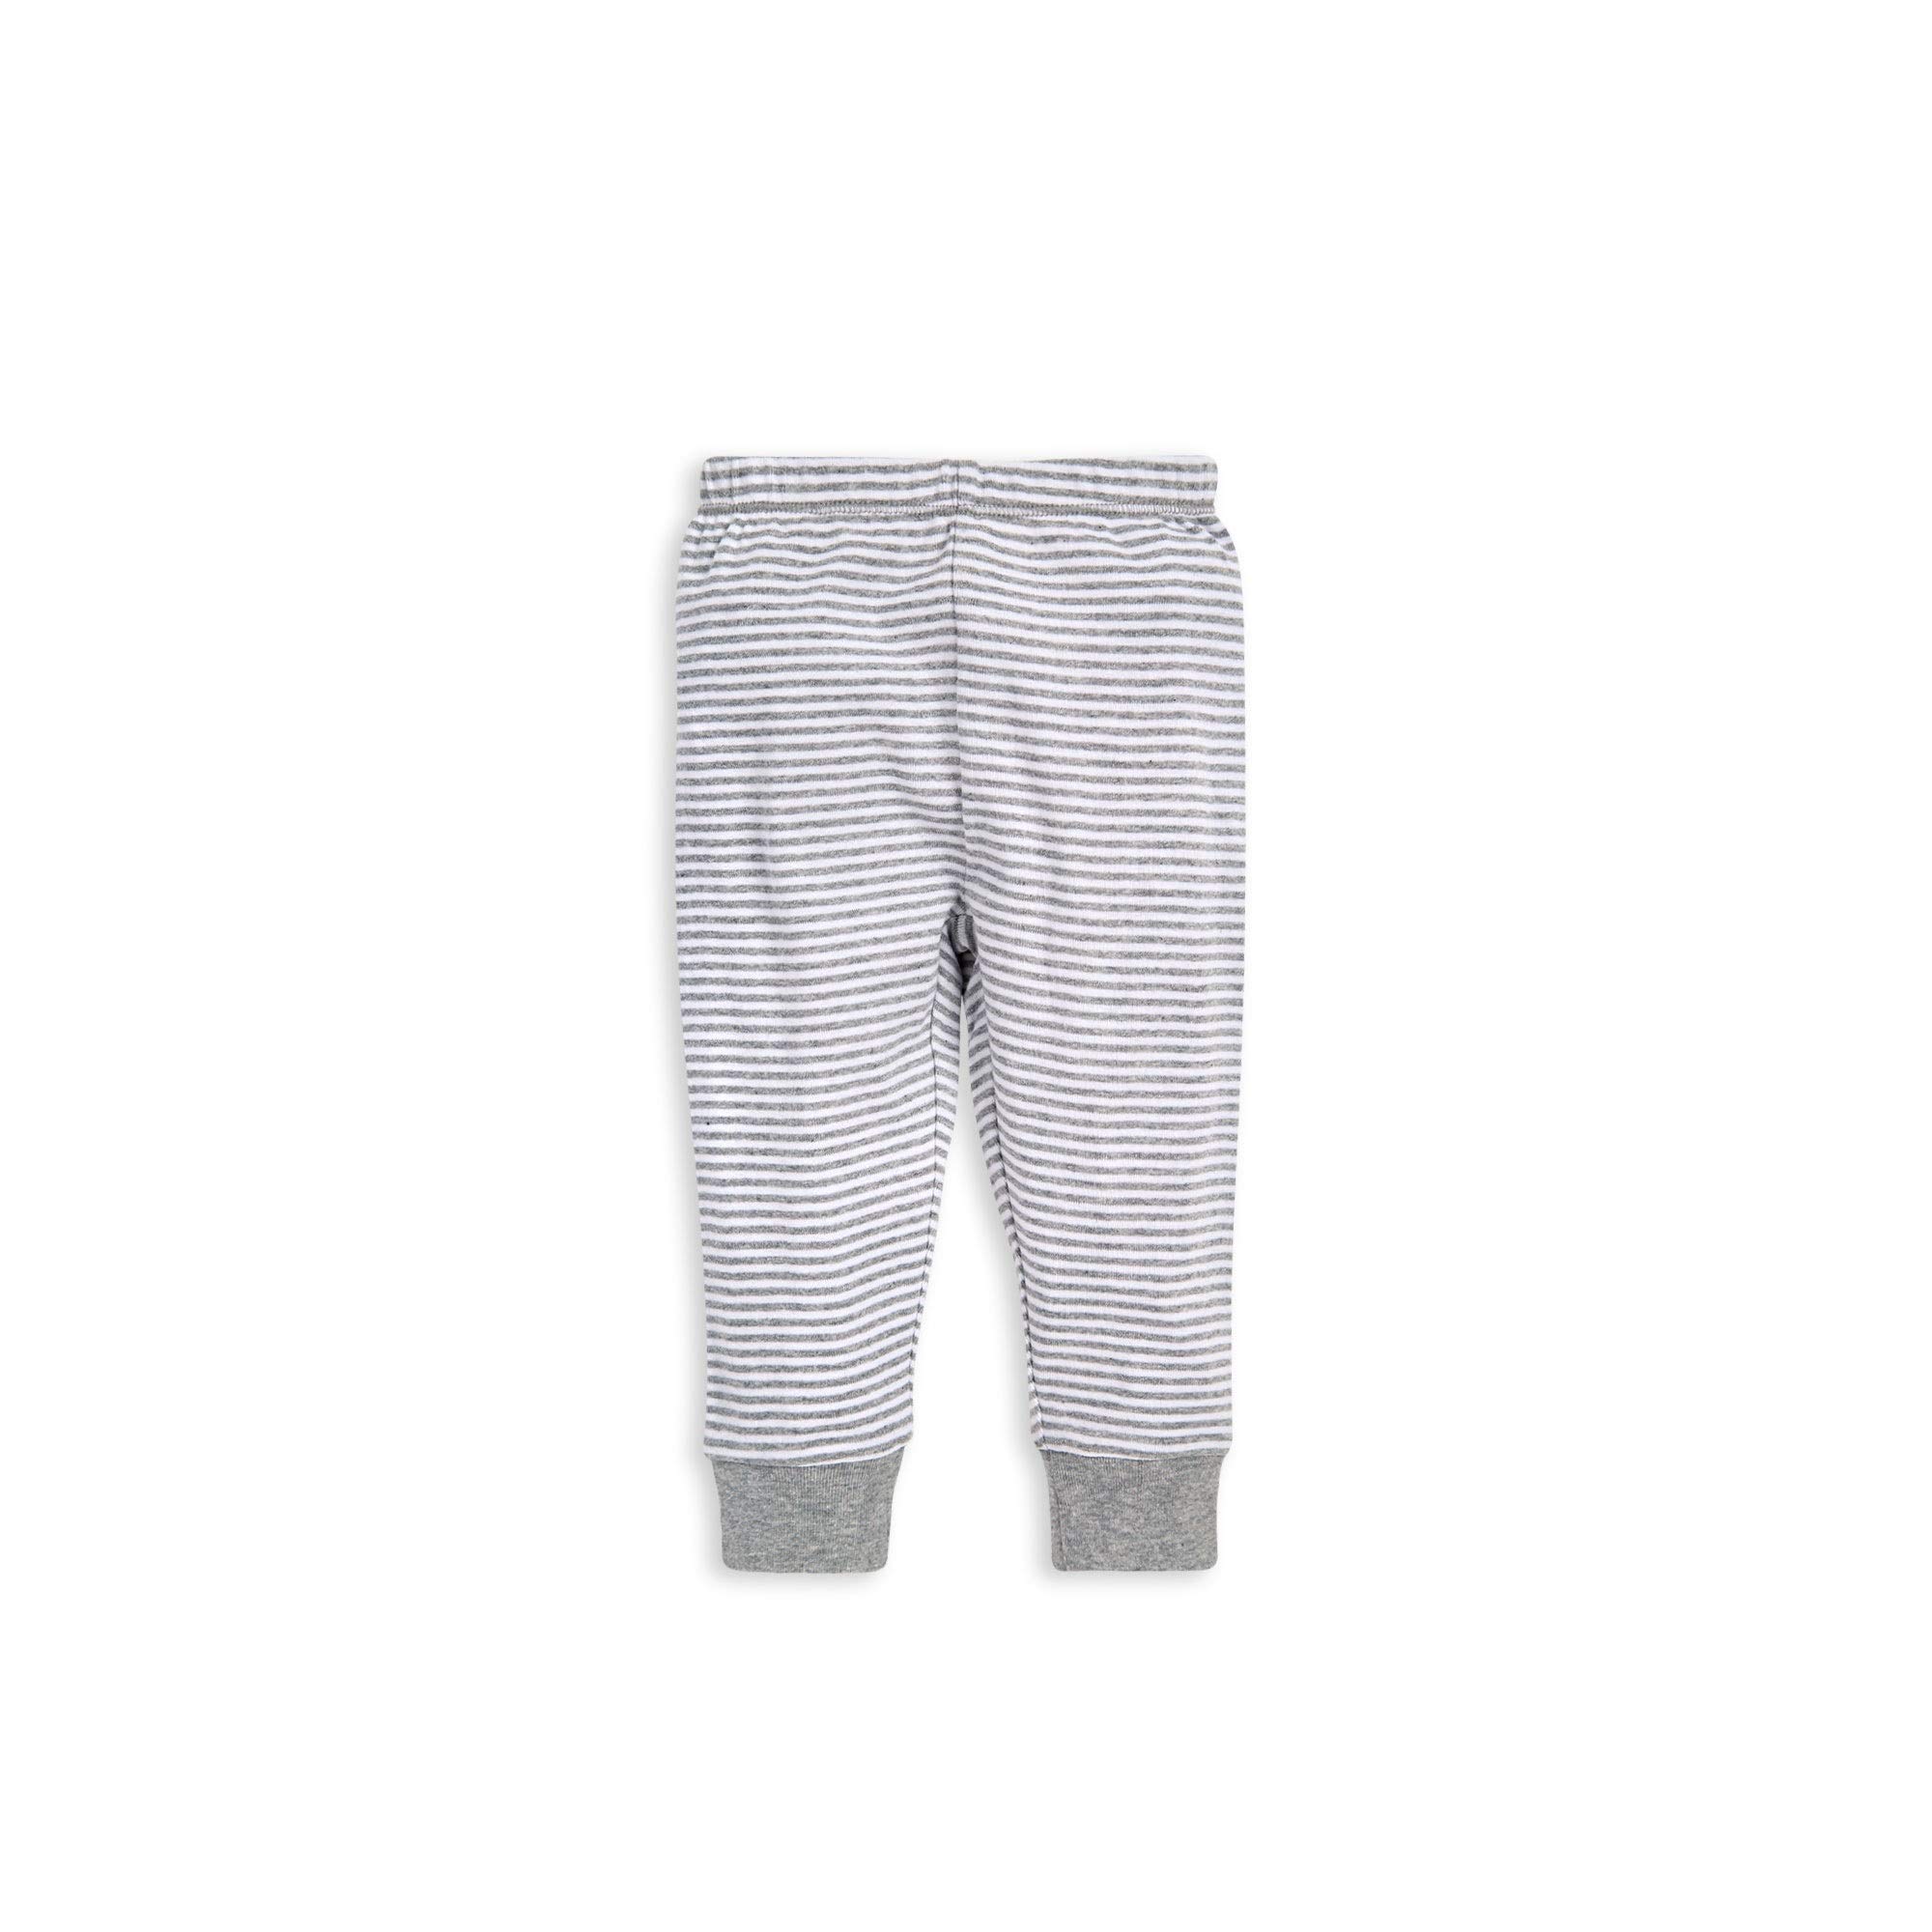 Burt's Bees Baby unisex baby Pants, of 2 Lightweight Knit Infant Bottoms, 100% Organic Cotton and Toddler Layette Set, Grey Solid/Stripes, Newborn US